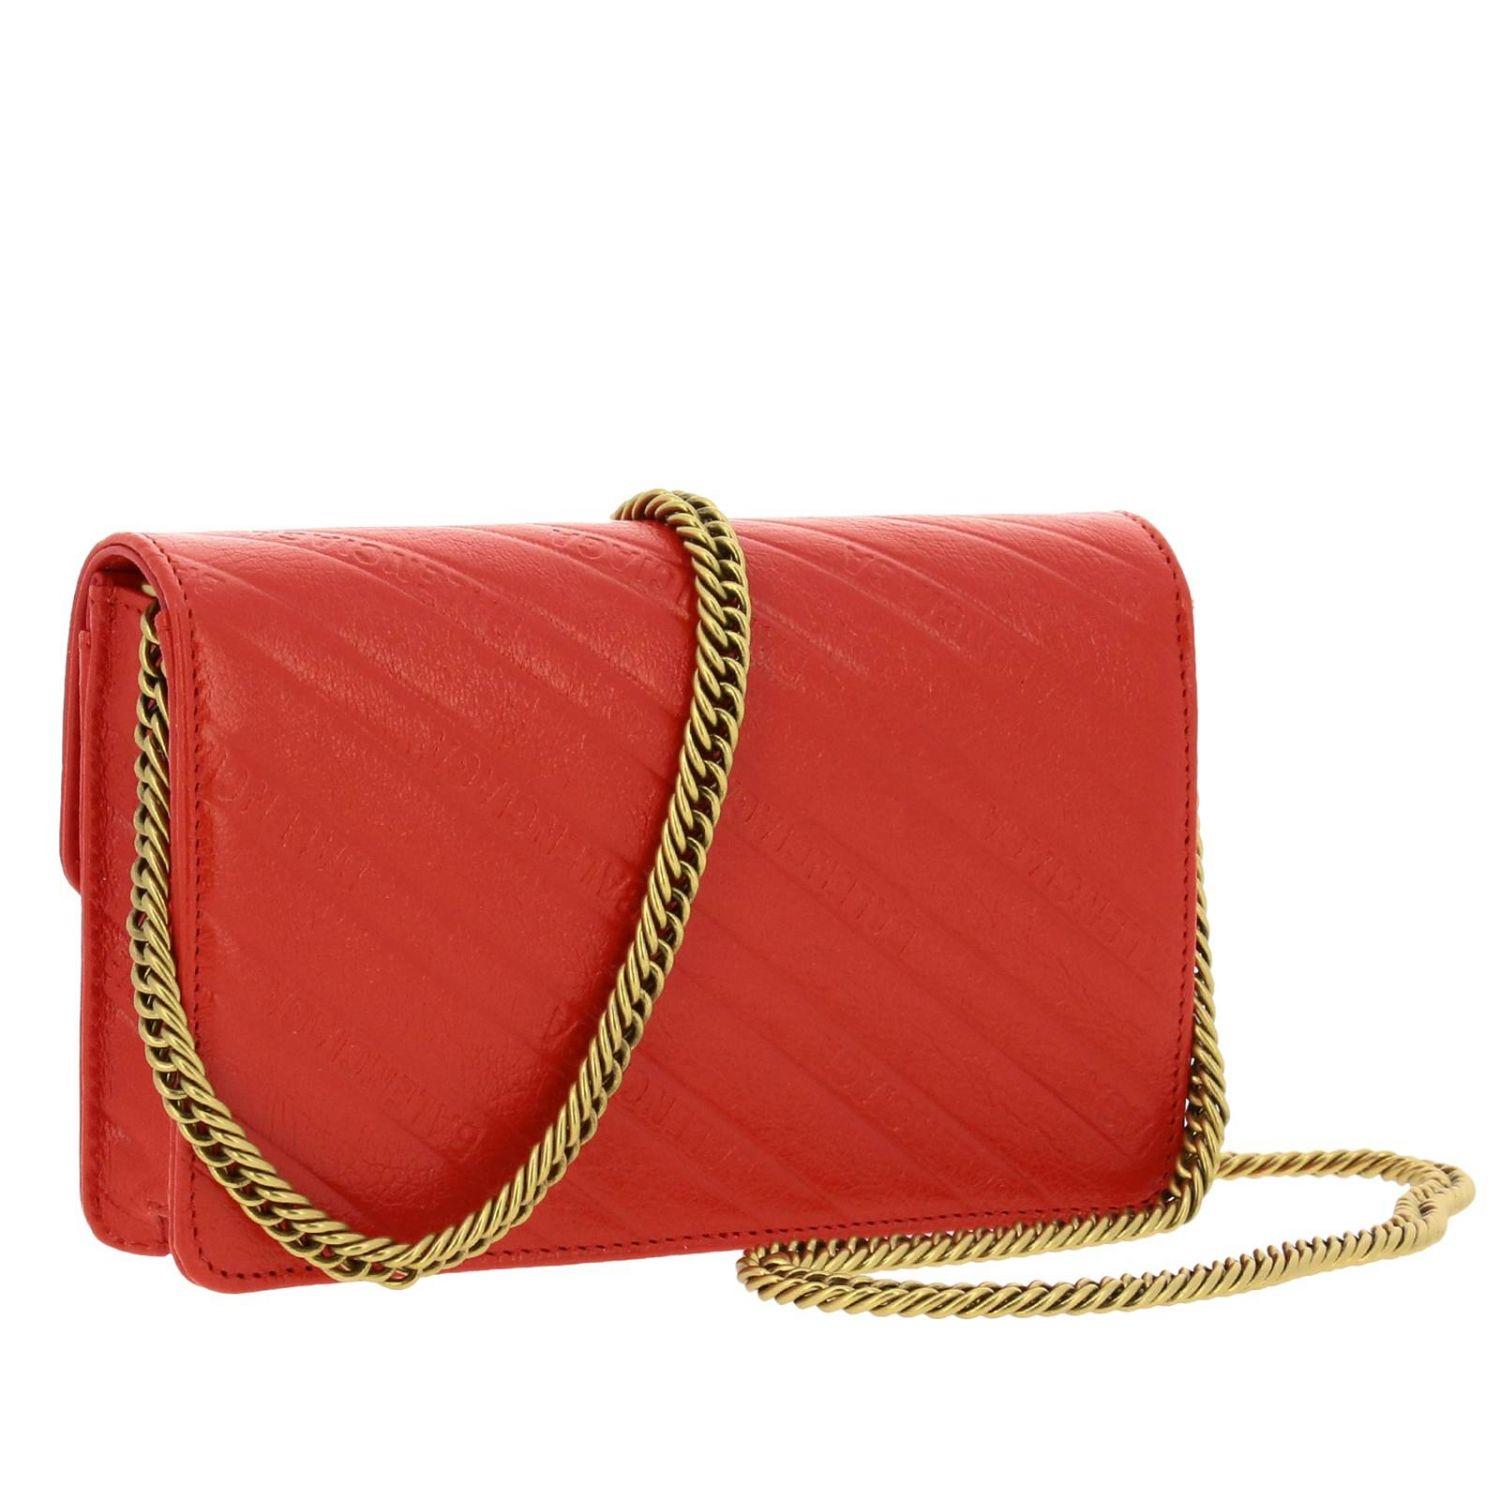 Balenciaga Bb Chain Wallet Mini Bag In Leather With All-over Embossed Logo in Red - Lyst